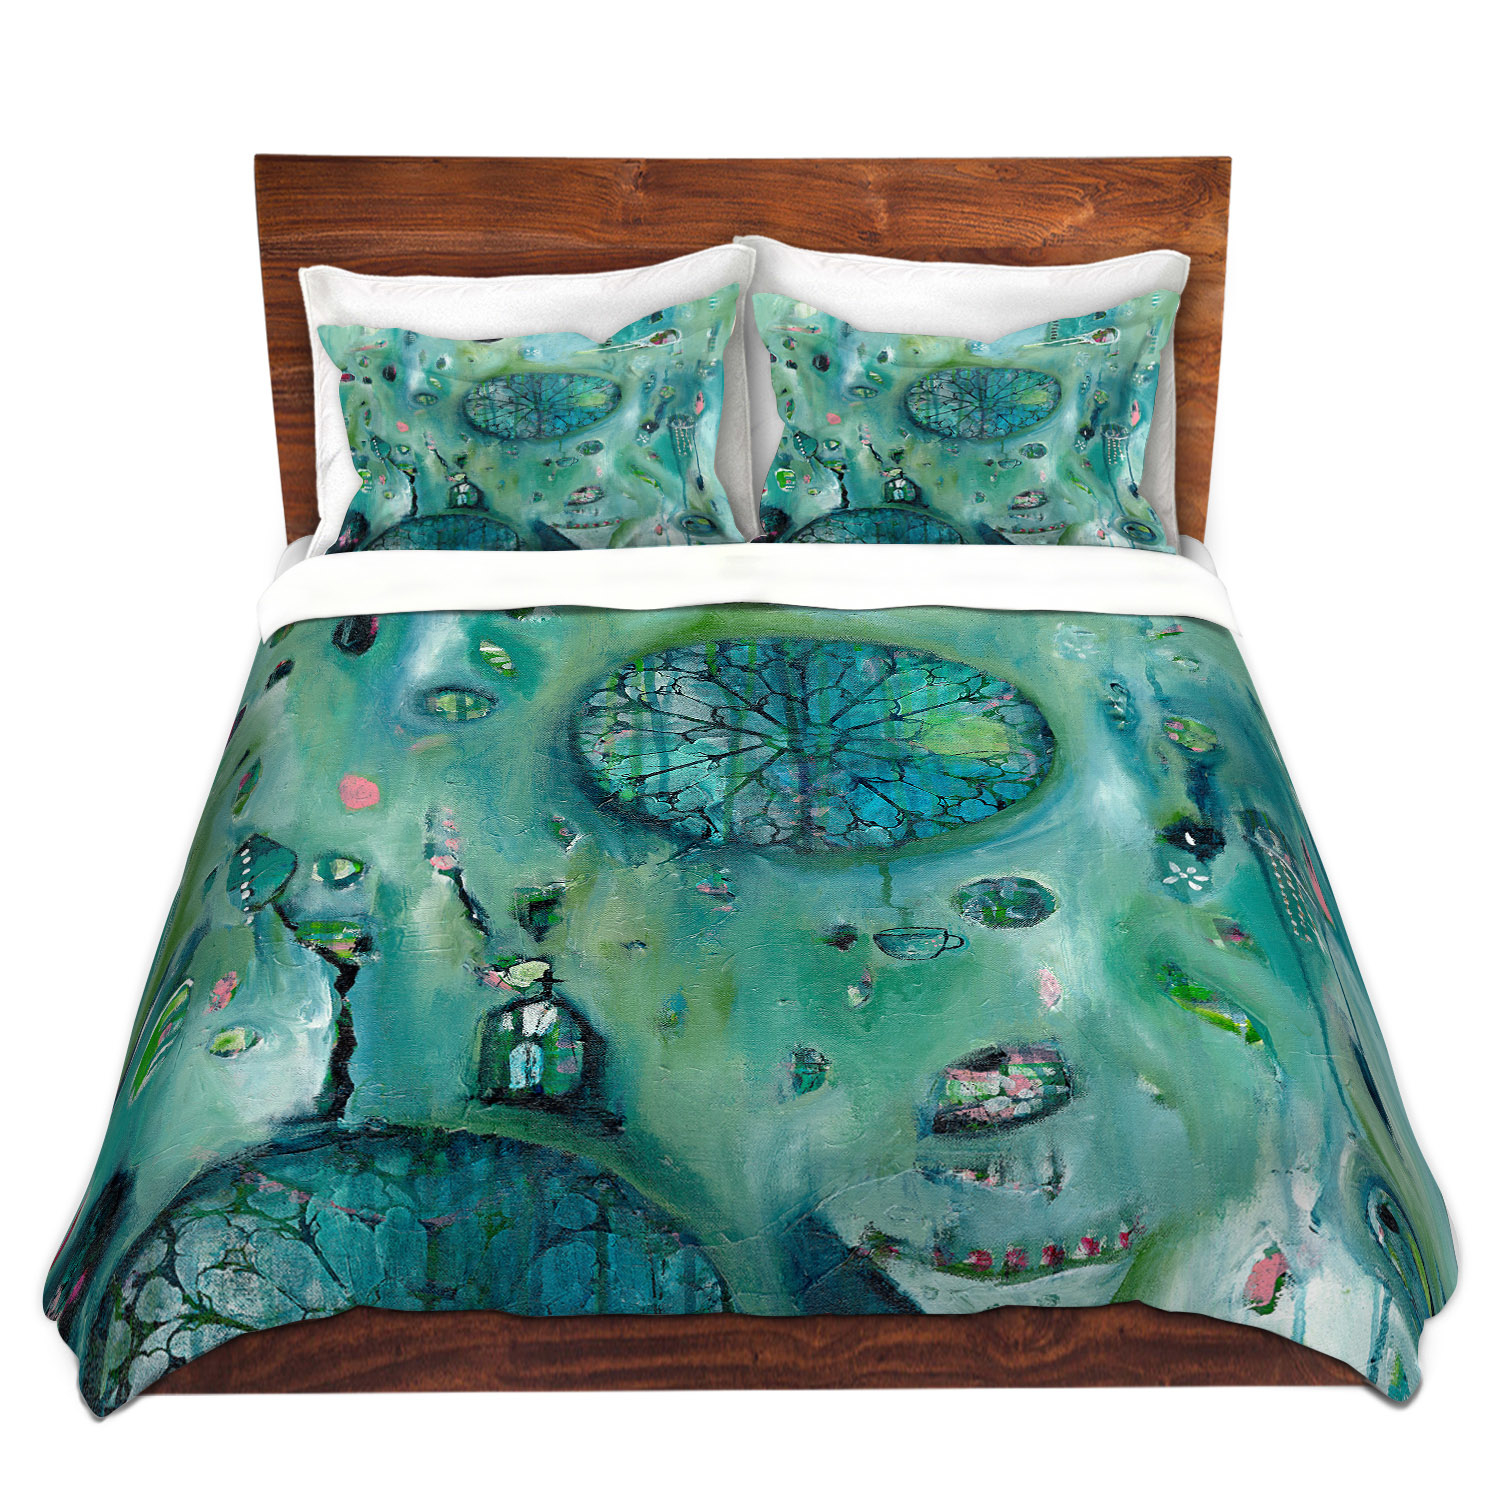 Dianoche Microfiber Duvet Covers By Denise Daffara - Windows To Another World